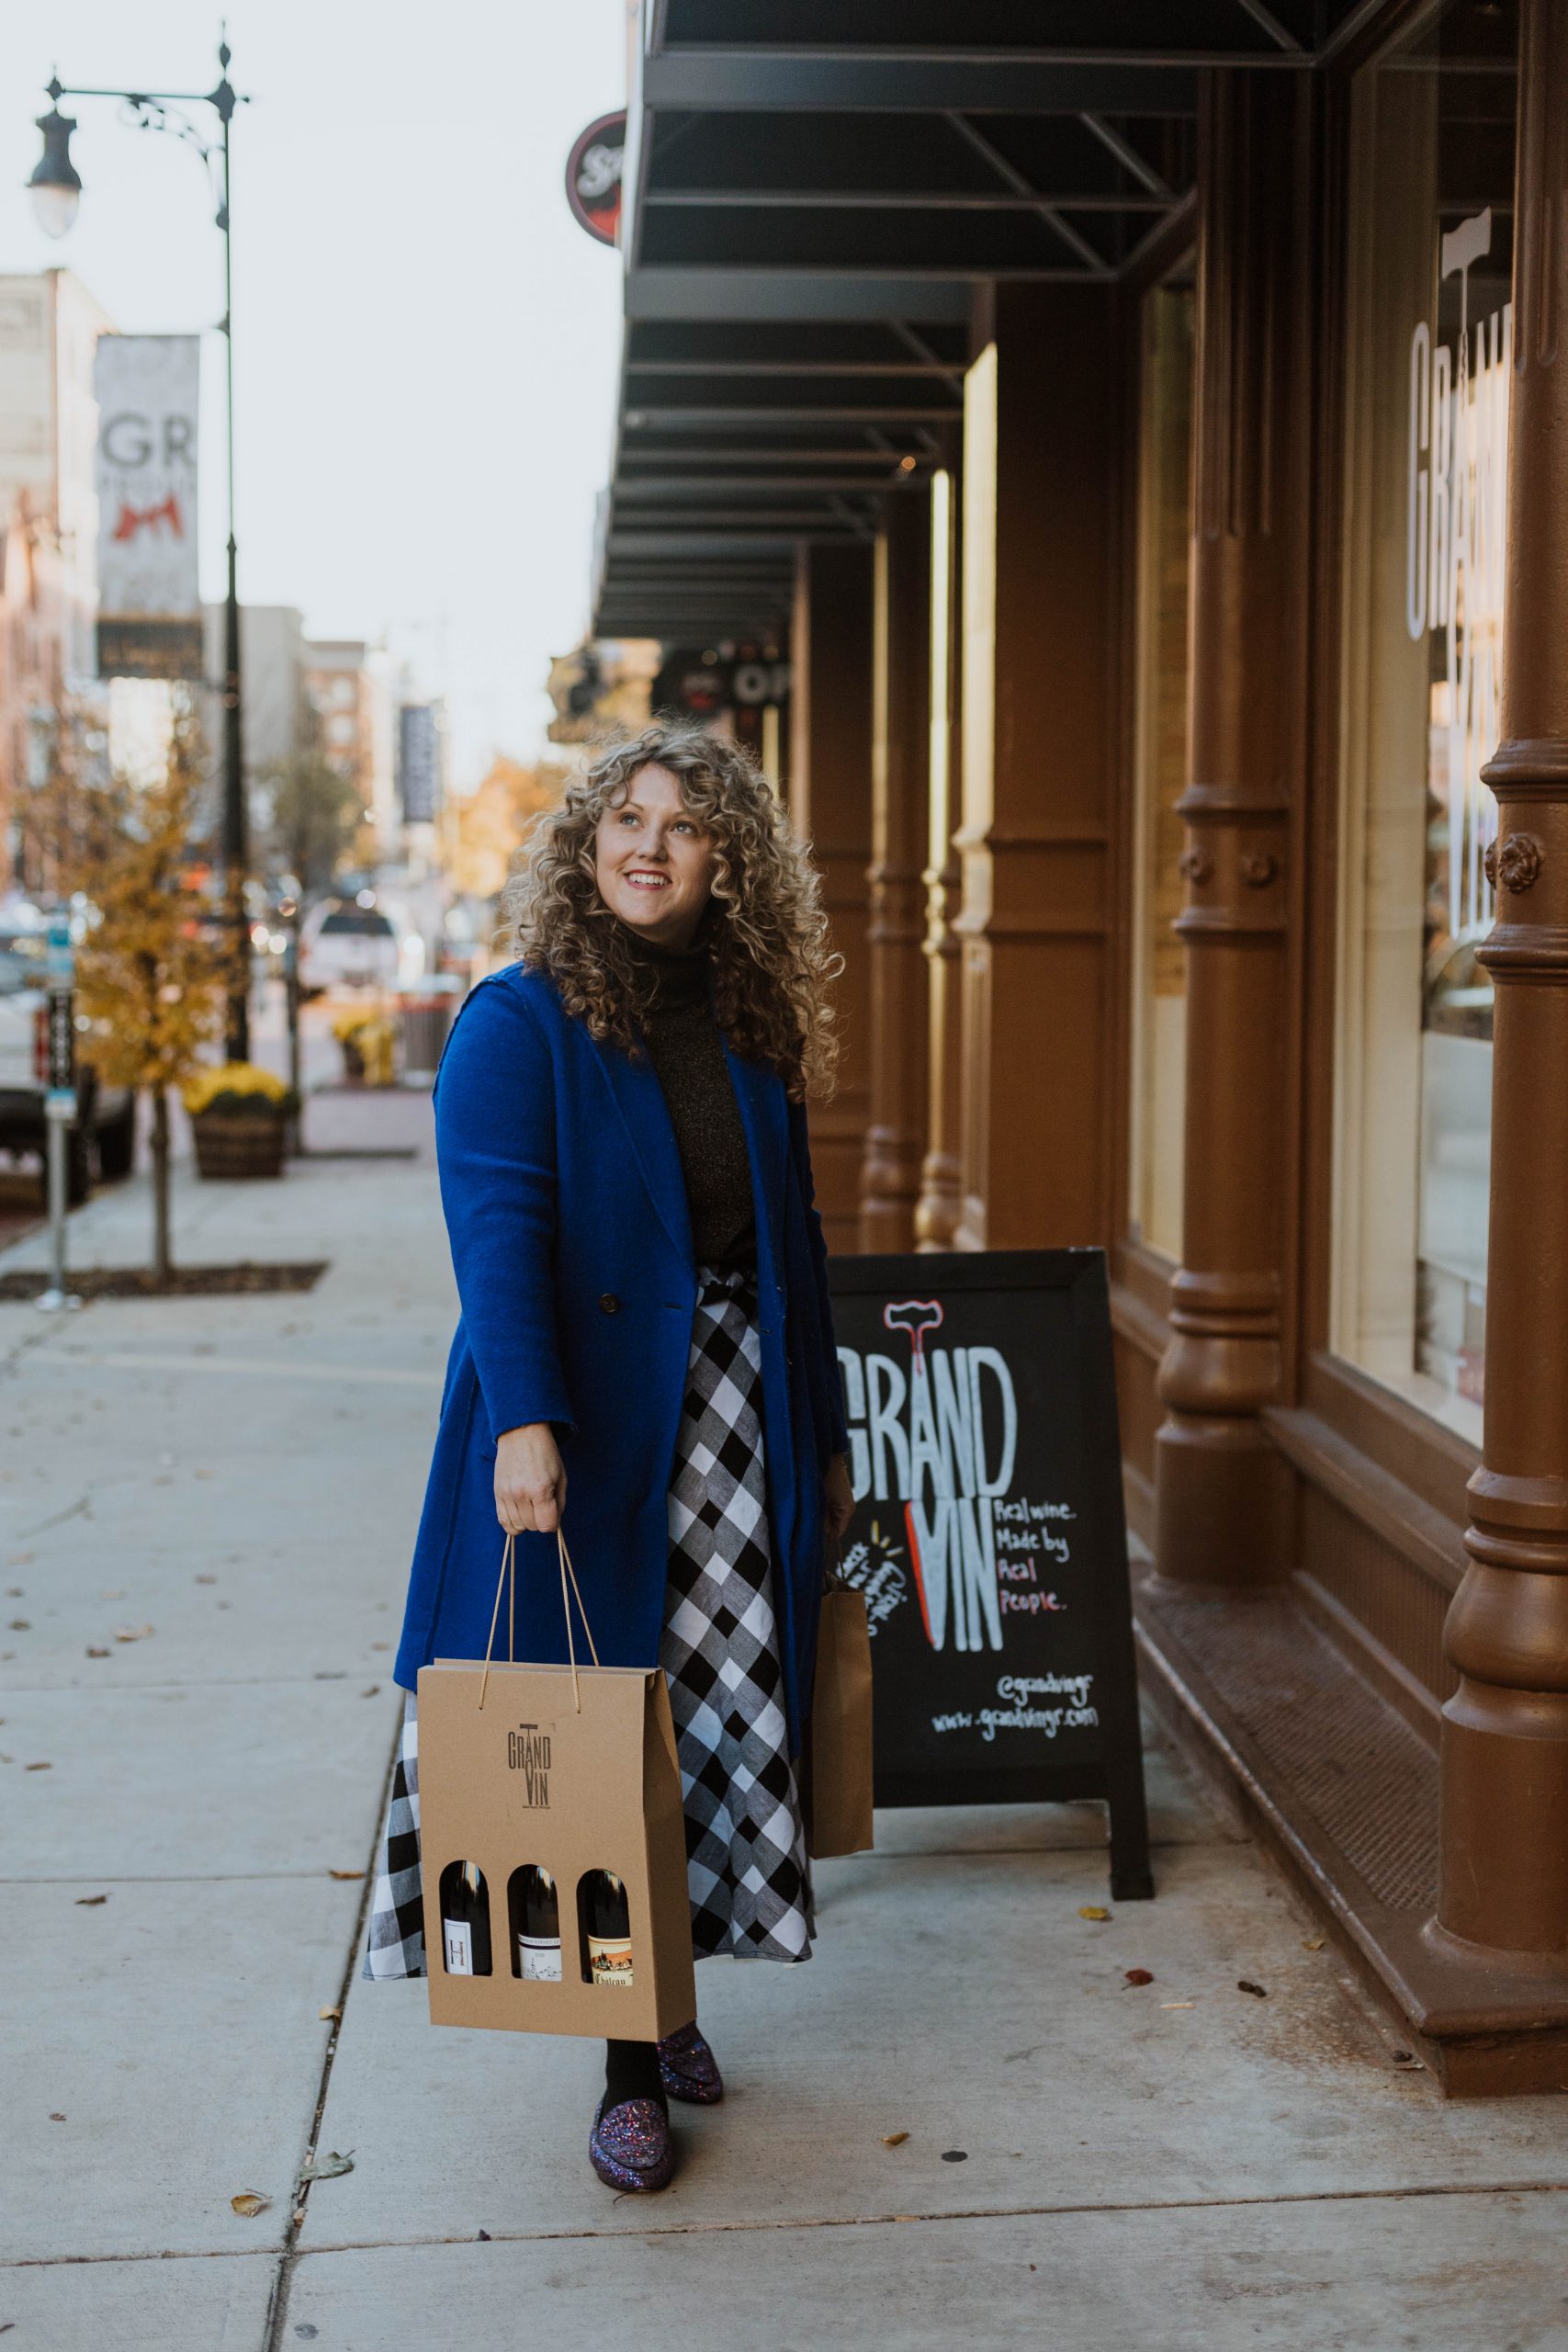 Where to buy wine in Grand Rapids